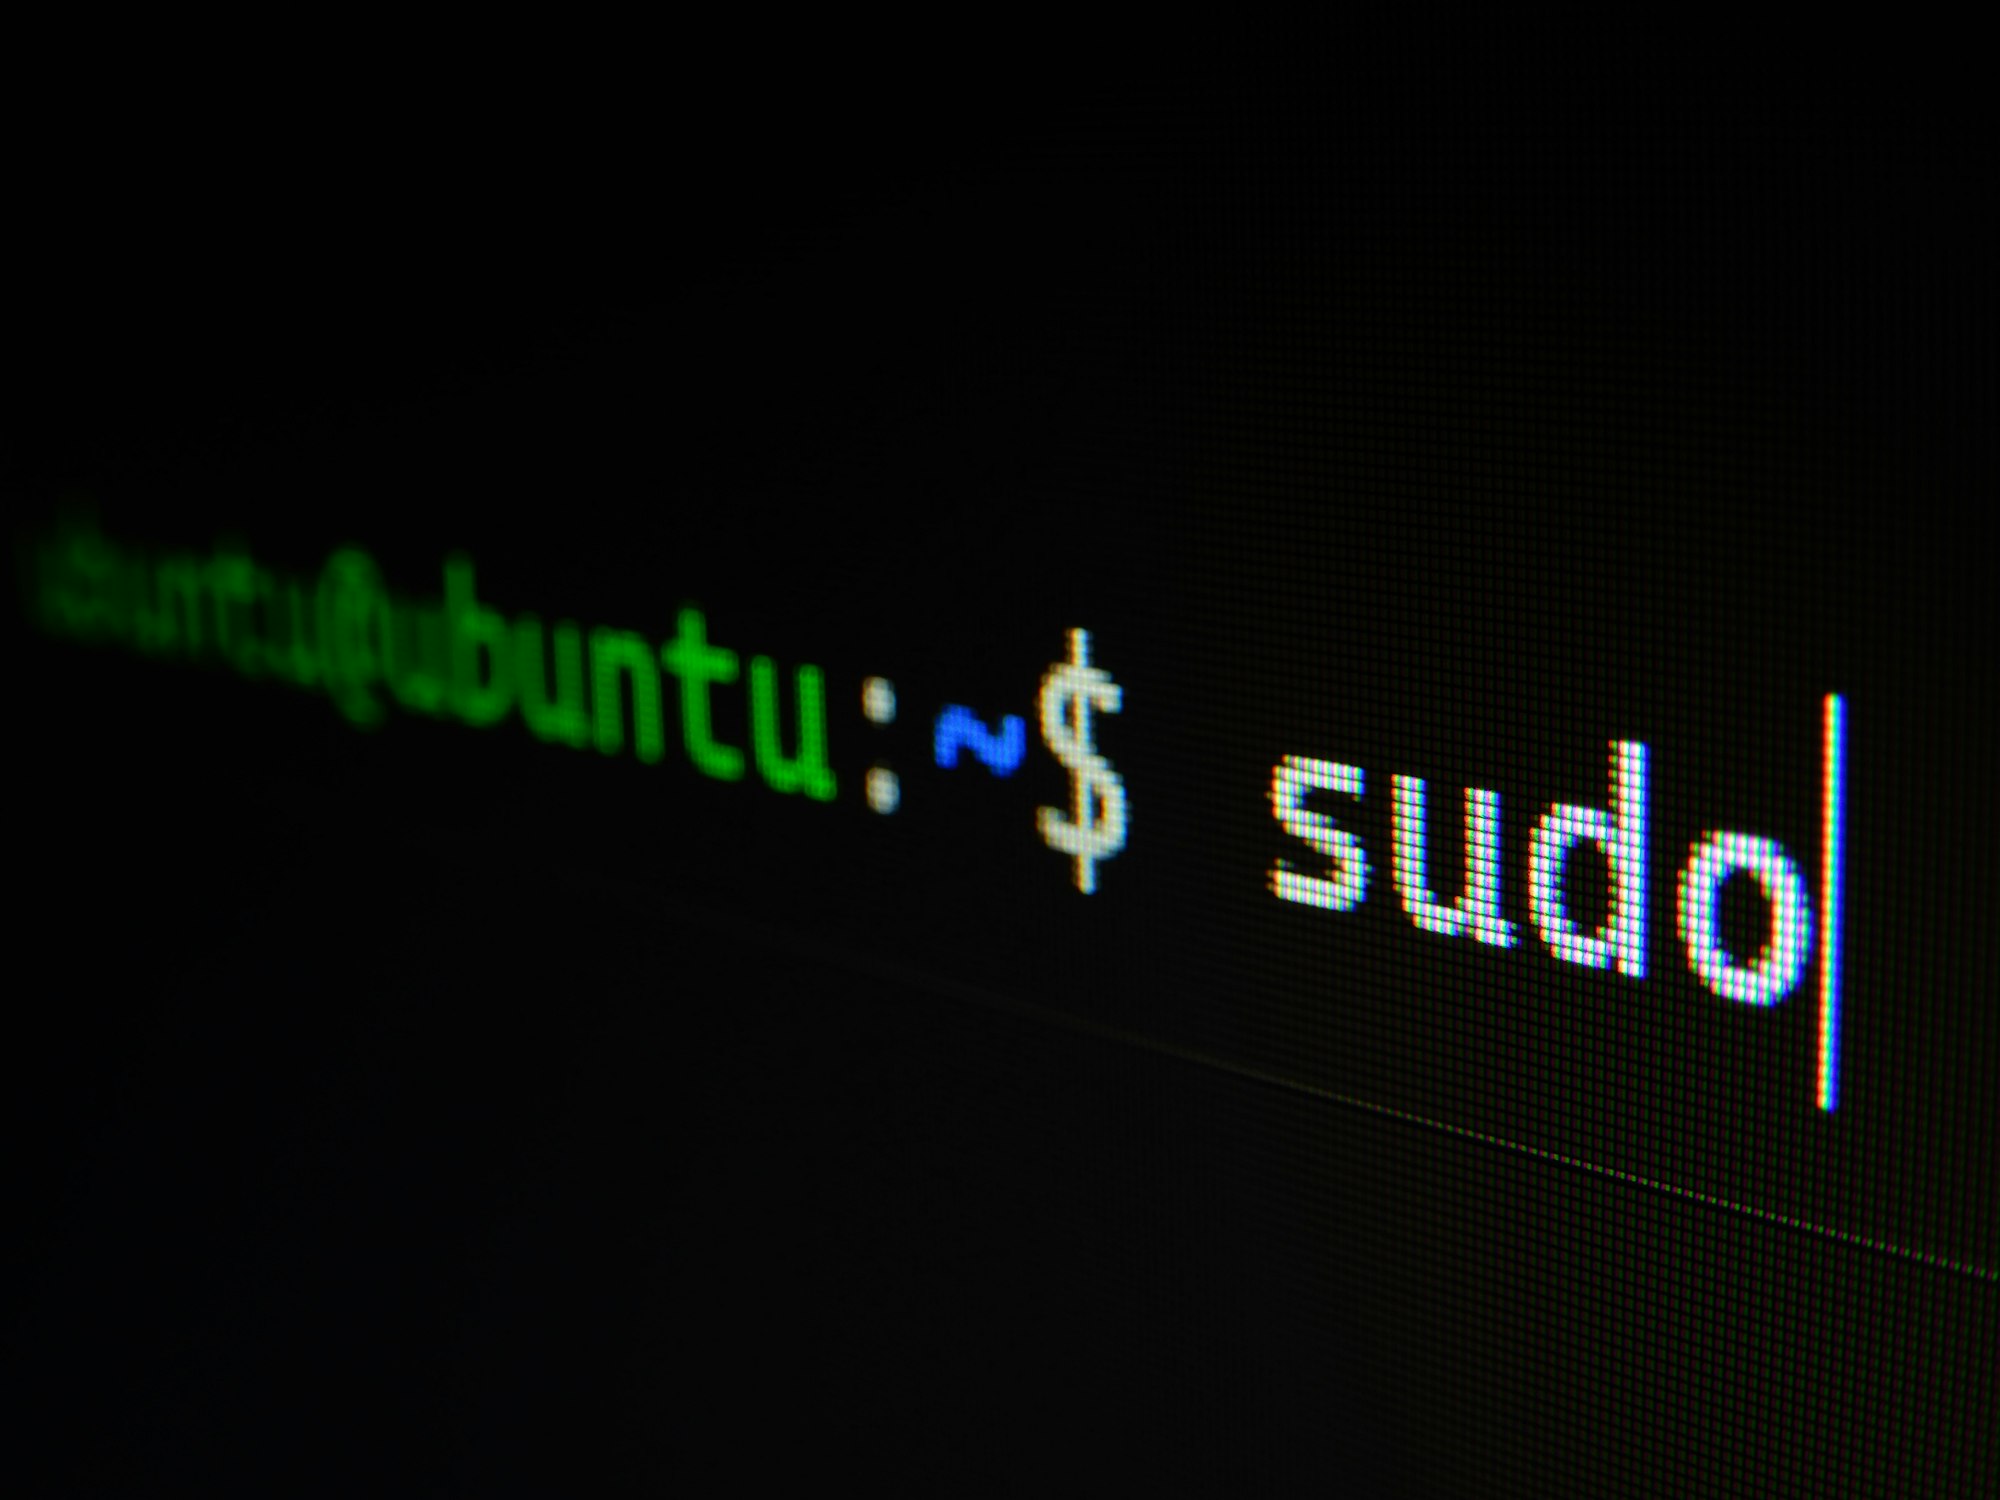 A command line interface for the user ubuntu on machine ubuntu, with the 'sudo' command typed out in the terminal